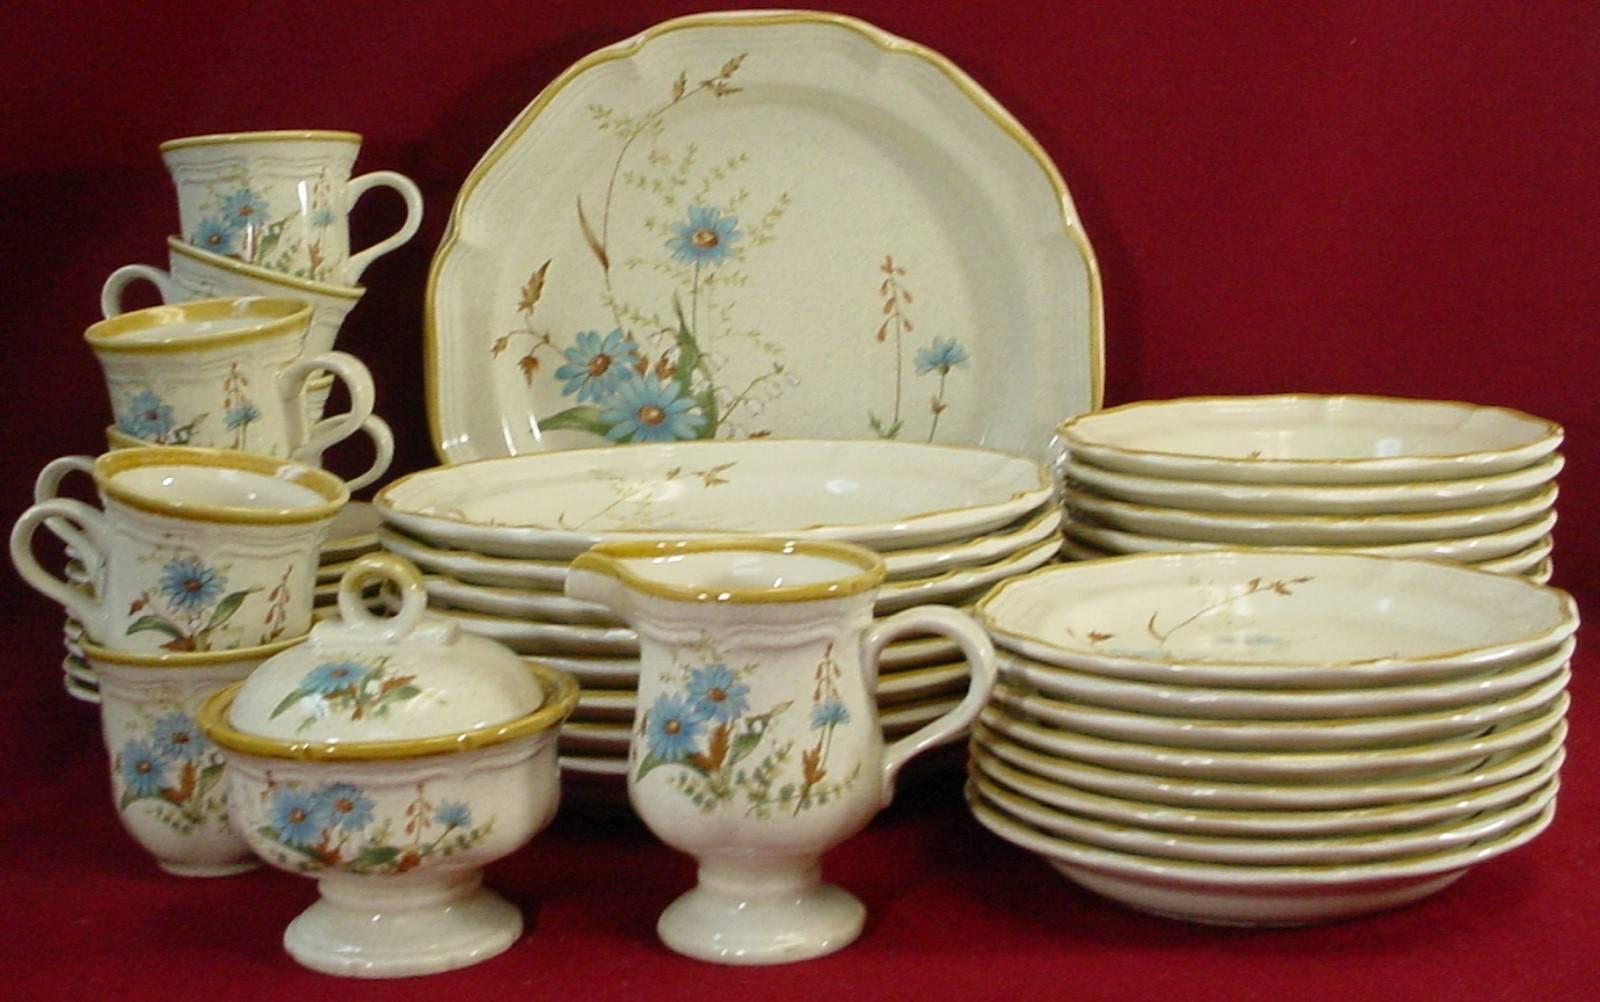 MIKASA china BLUE DAISIES EB804 pattern 44-piece SET SERVICE for Eight (8)